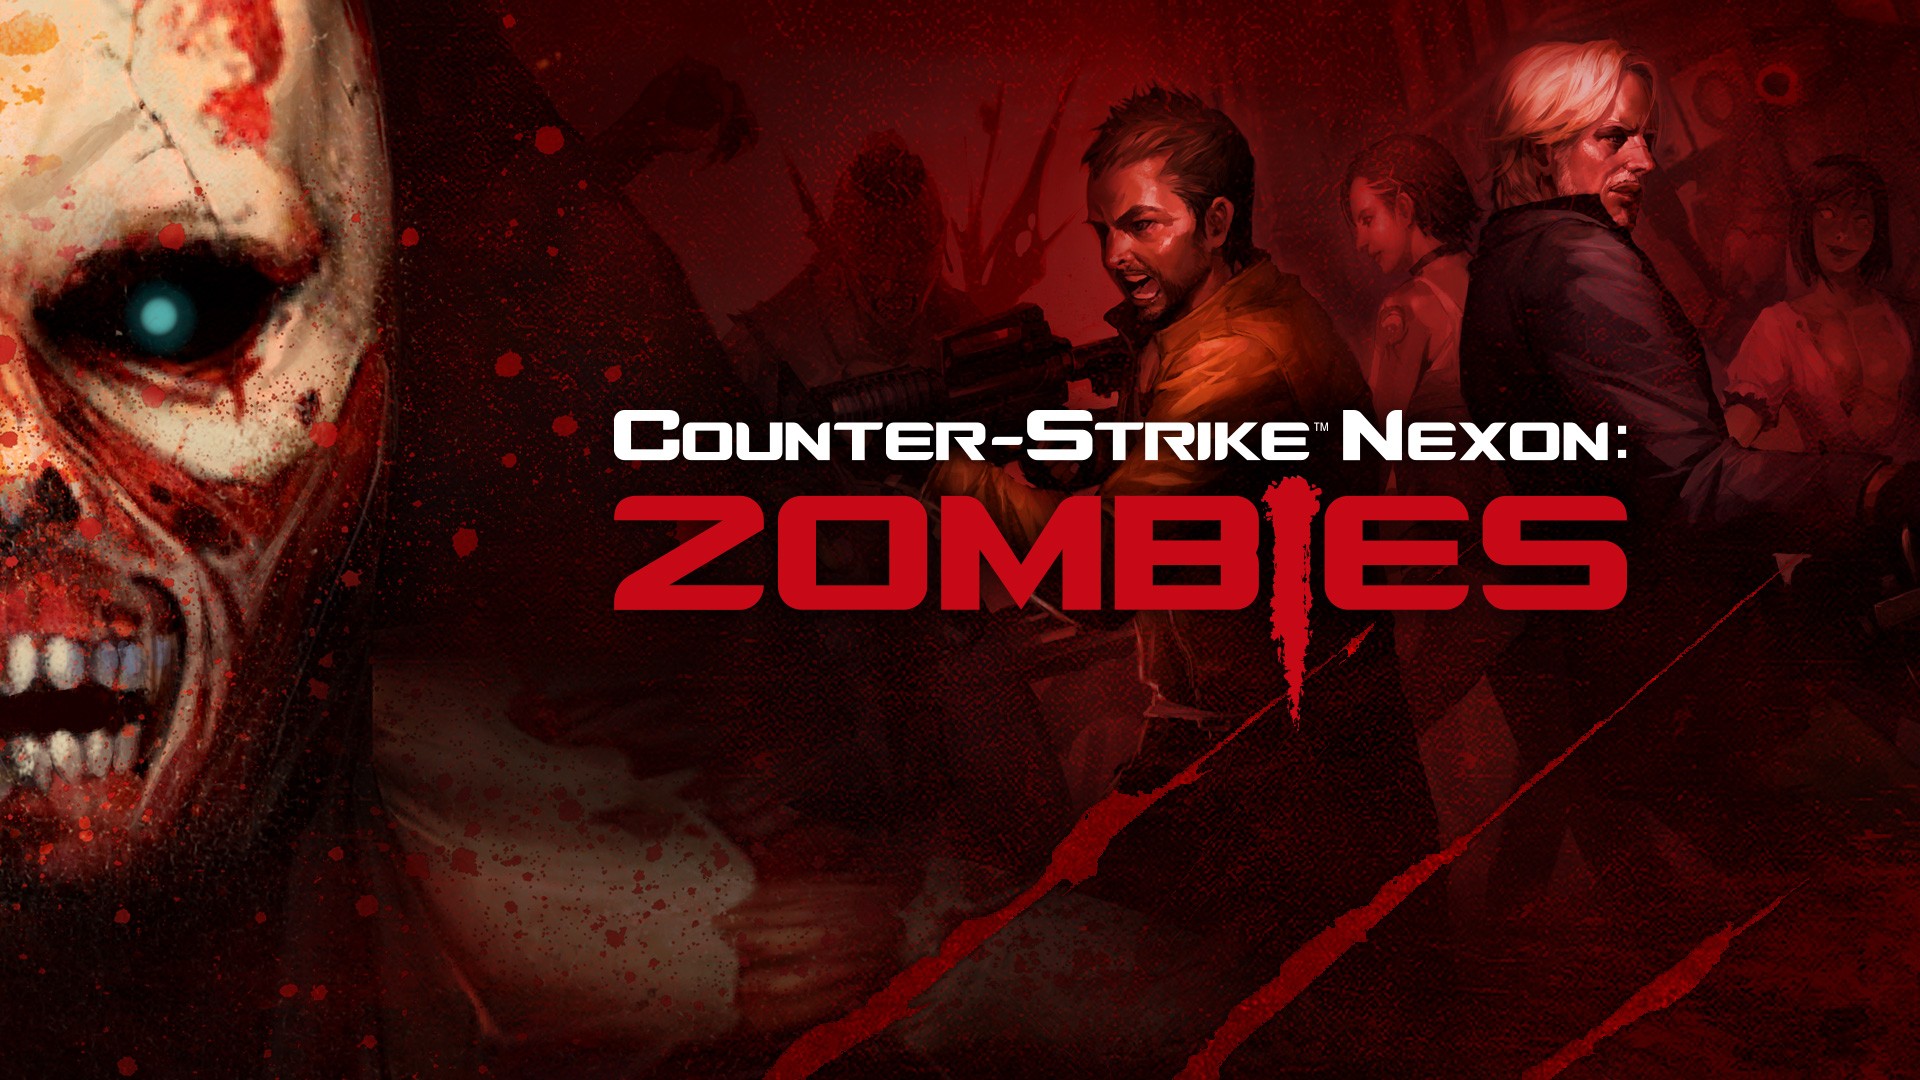 Counter-Strike-Nexon-Zombies-Brings-Anime-Girls-and-Undead-Fiends-Later-This-Year-Video-454065-2.jpg